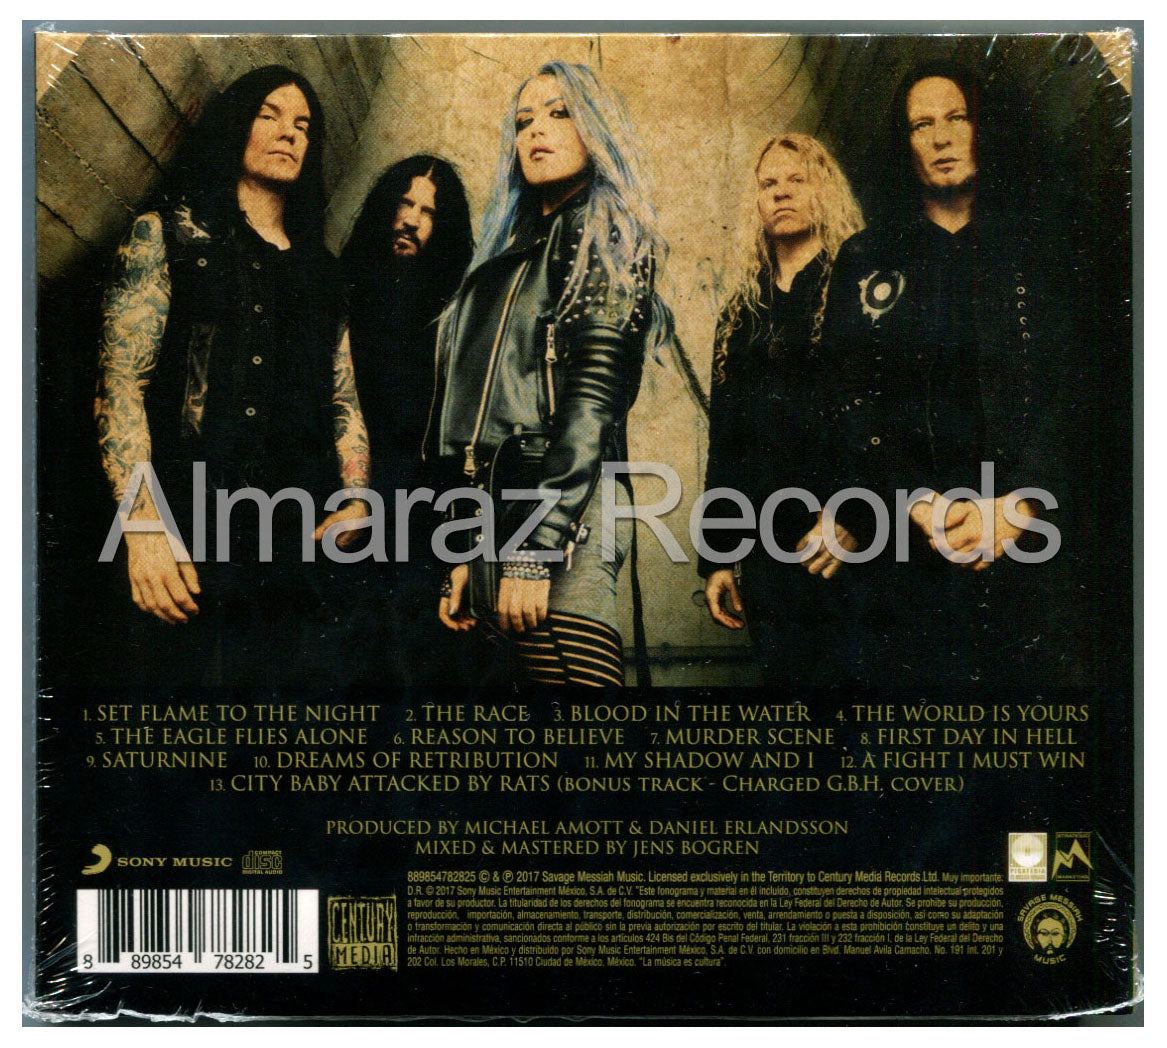 Arch Enemy Will To Power CD